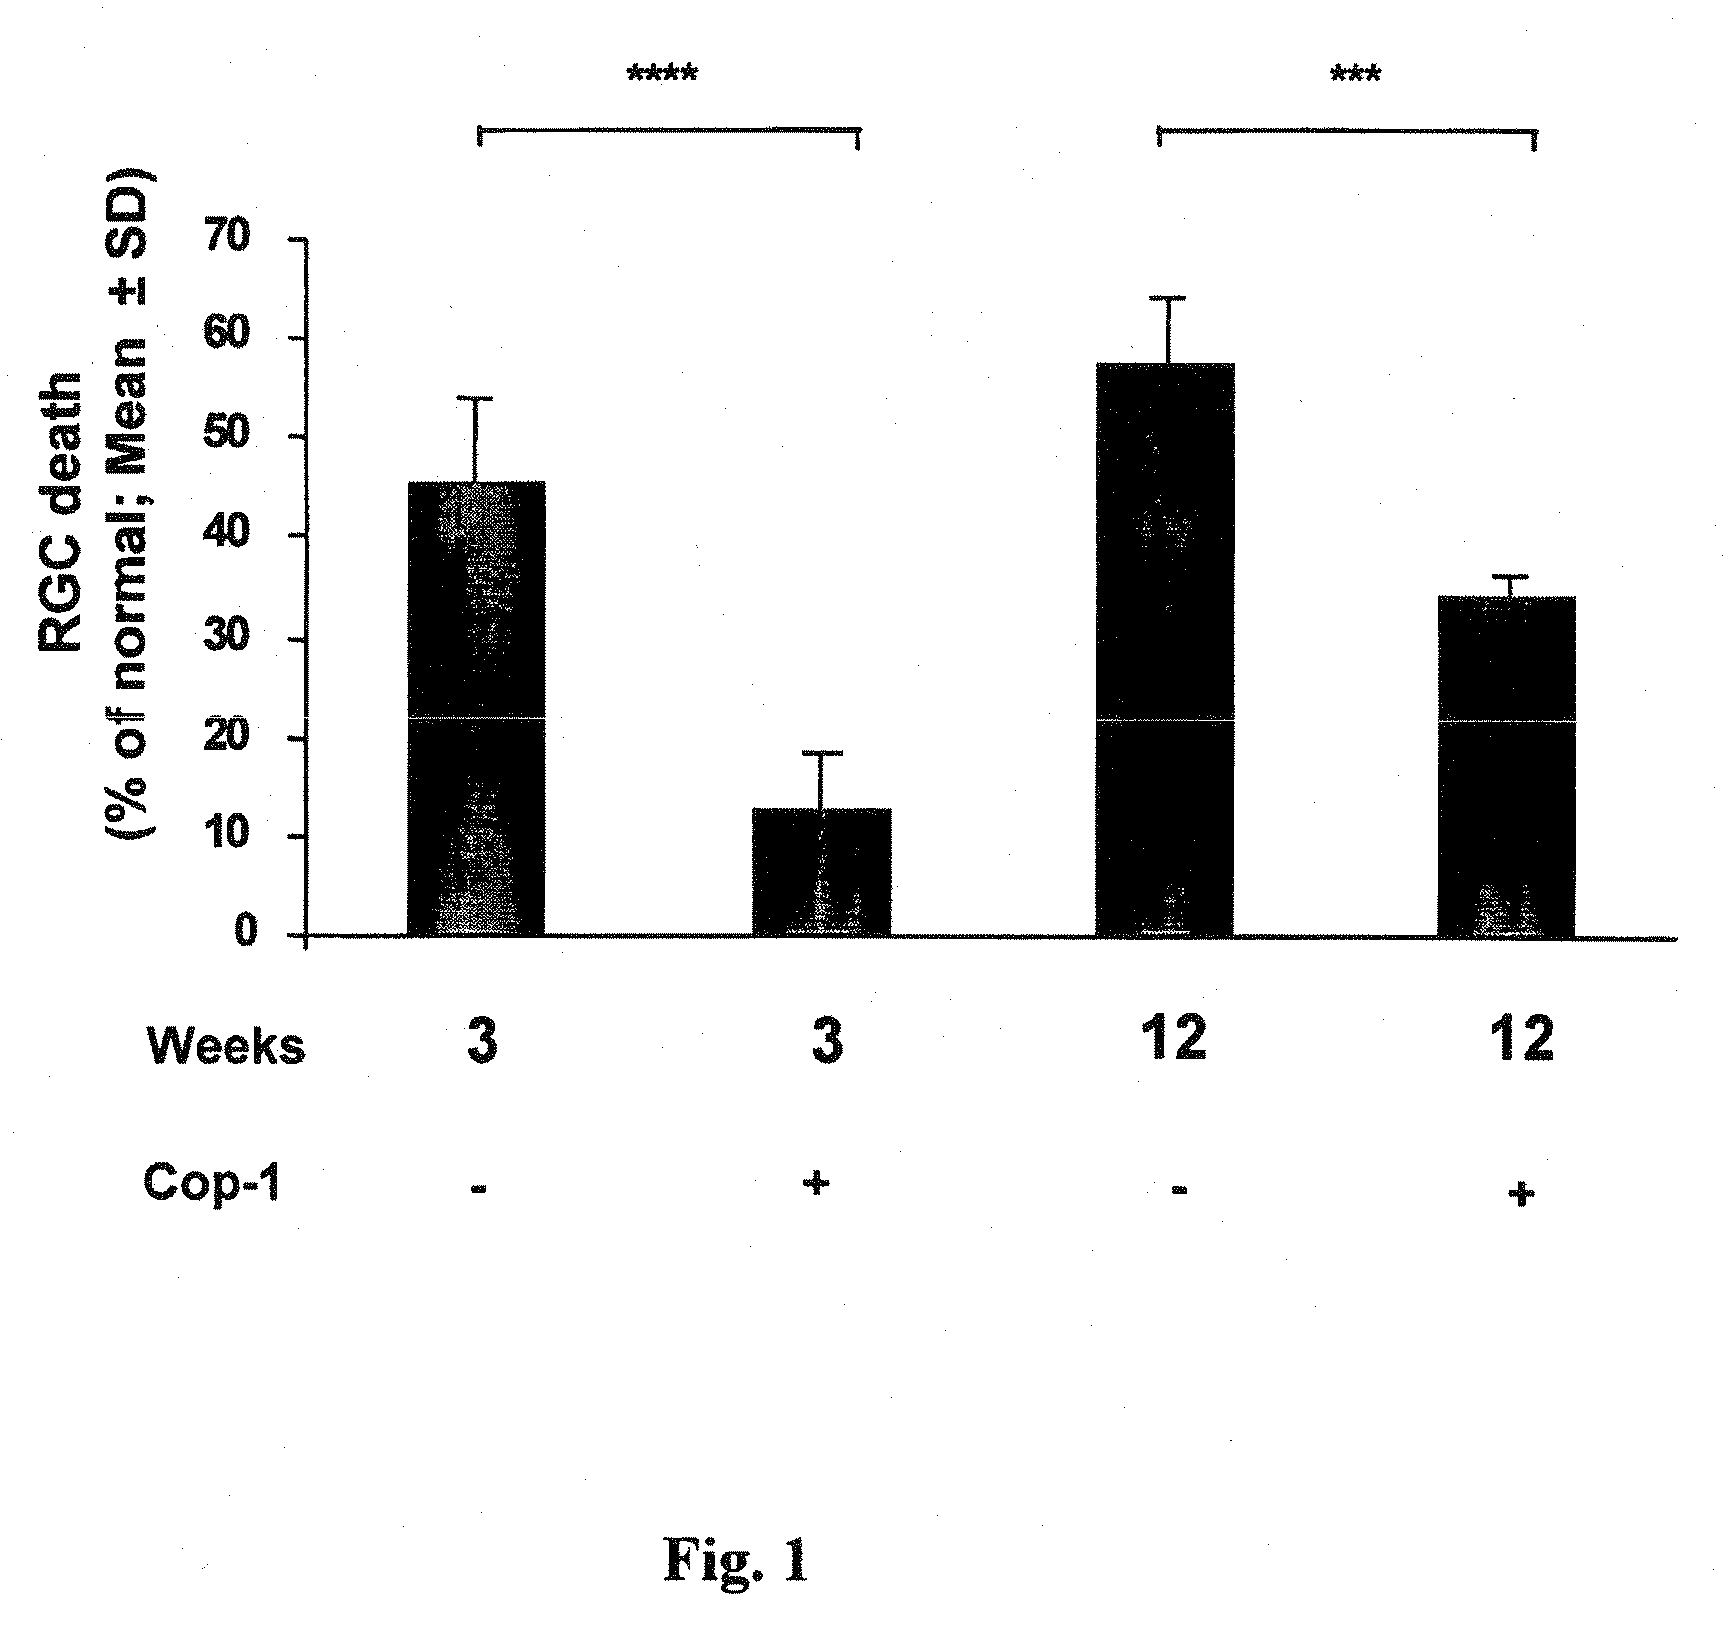 Eye-drop vaccine containing copolymer 1 for therapeutic immunization